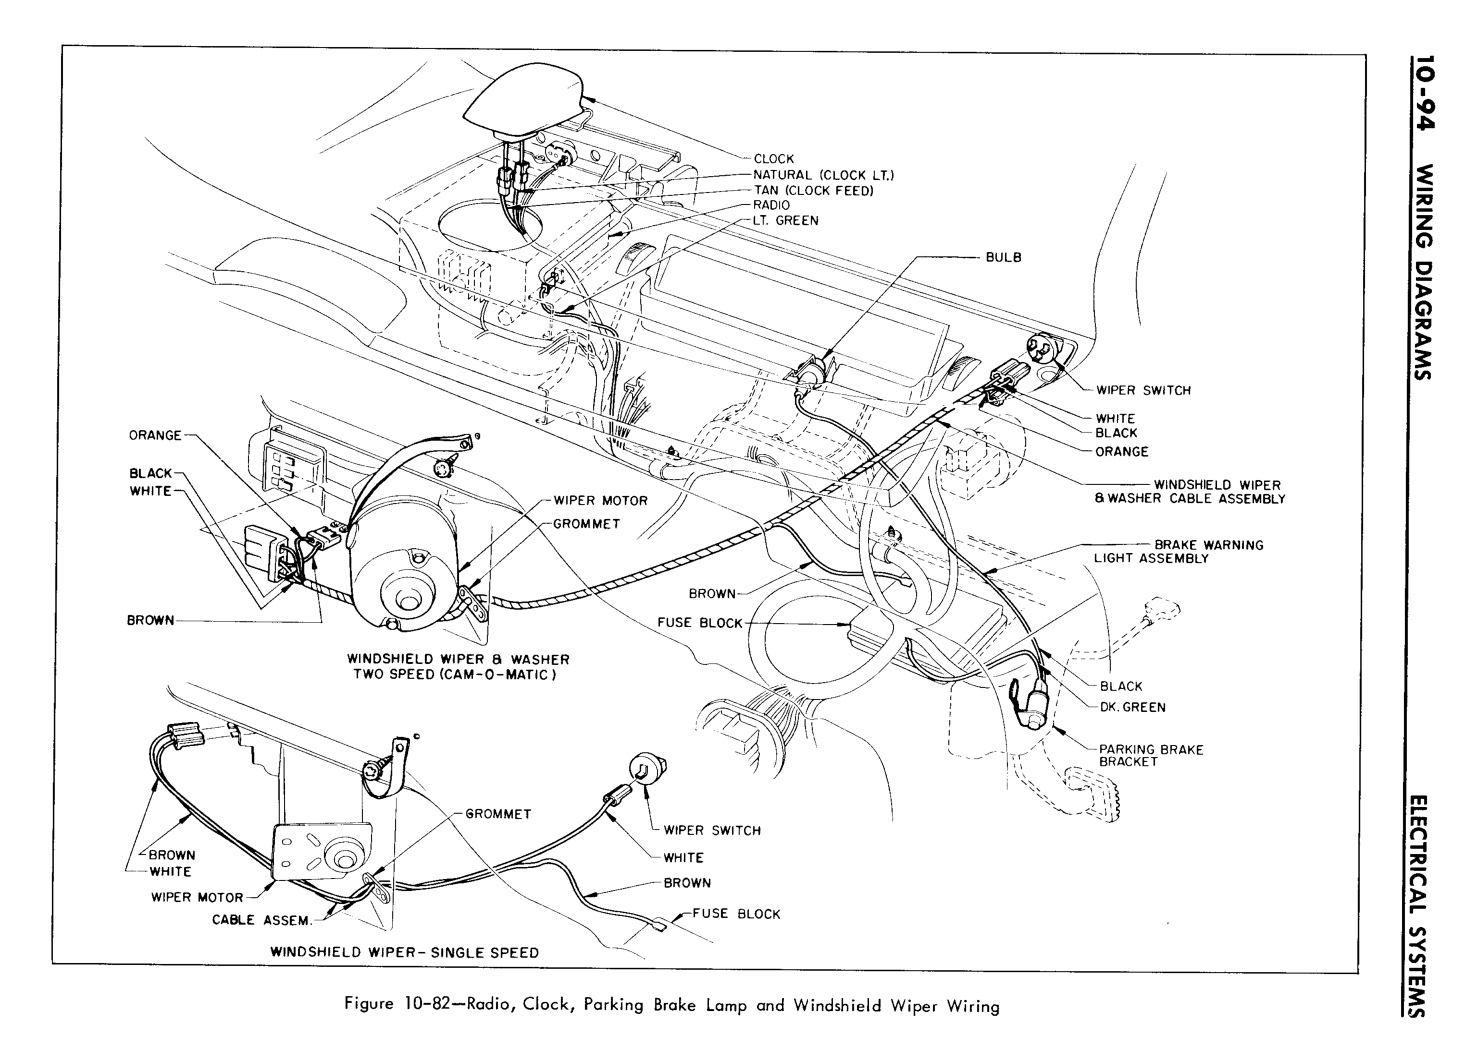 n_10 1961 Buick Shop Manual - Electrical Systems-094-094.jpg